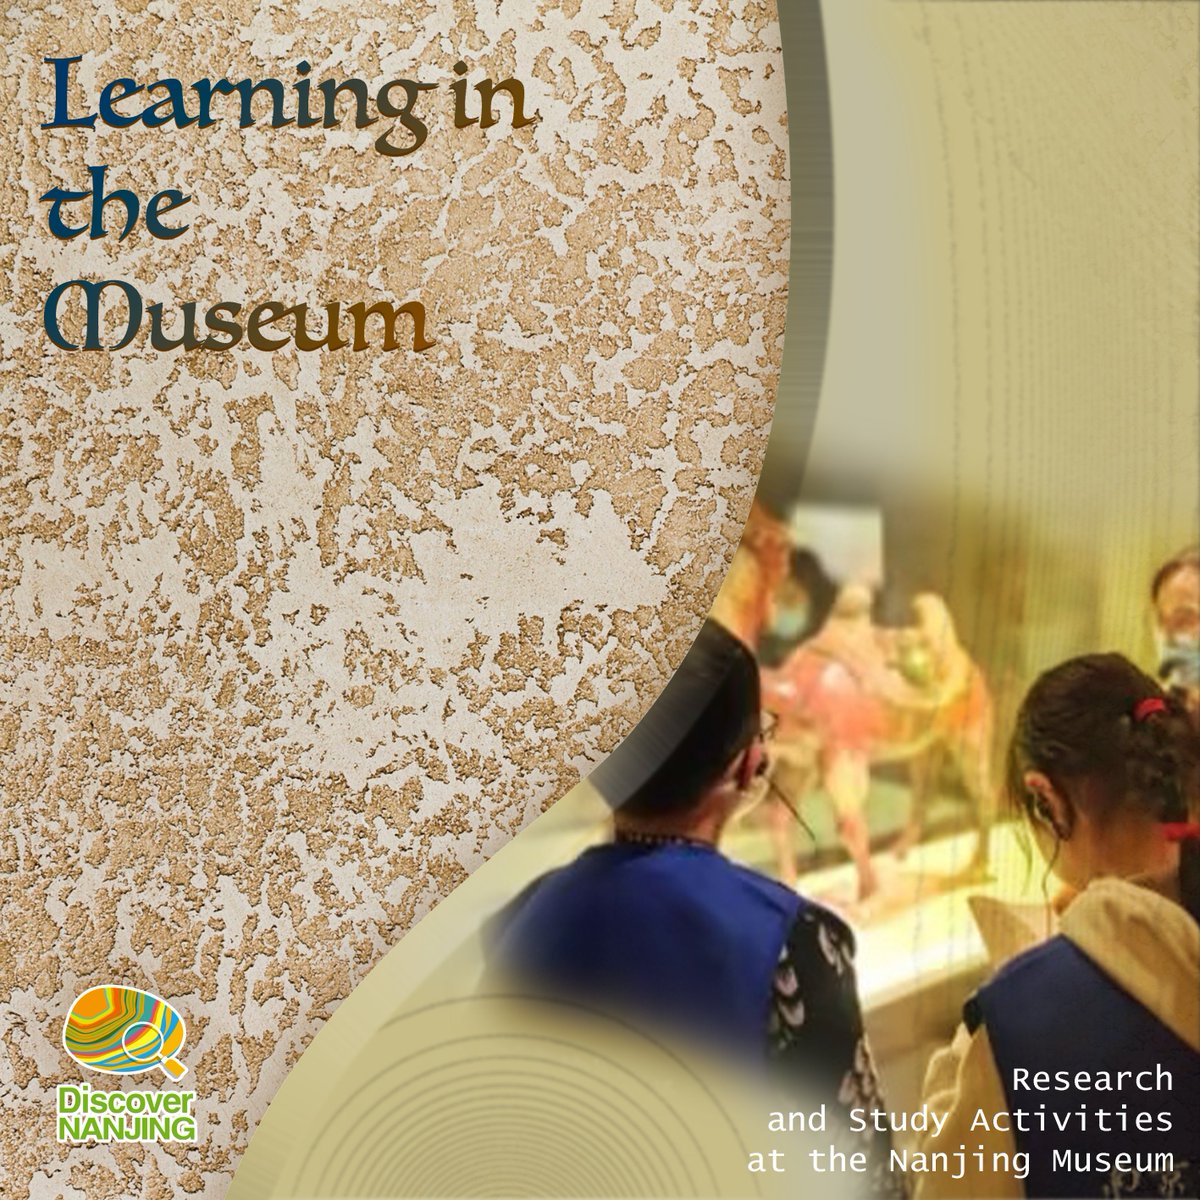 Nanjing Museum is a place where our Chinese history shows us how it walks through the path of time. No matter what your age is, there's always a museum you'll stop by. #CulturalCityNanjing #InternationalMuseumDay #MuseumsinChina #MuseumsforEducationandResearch @iChongqing_CIMC